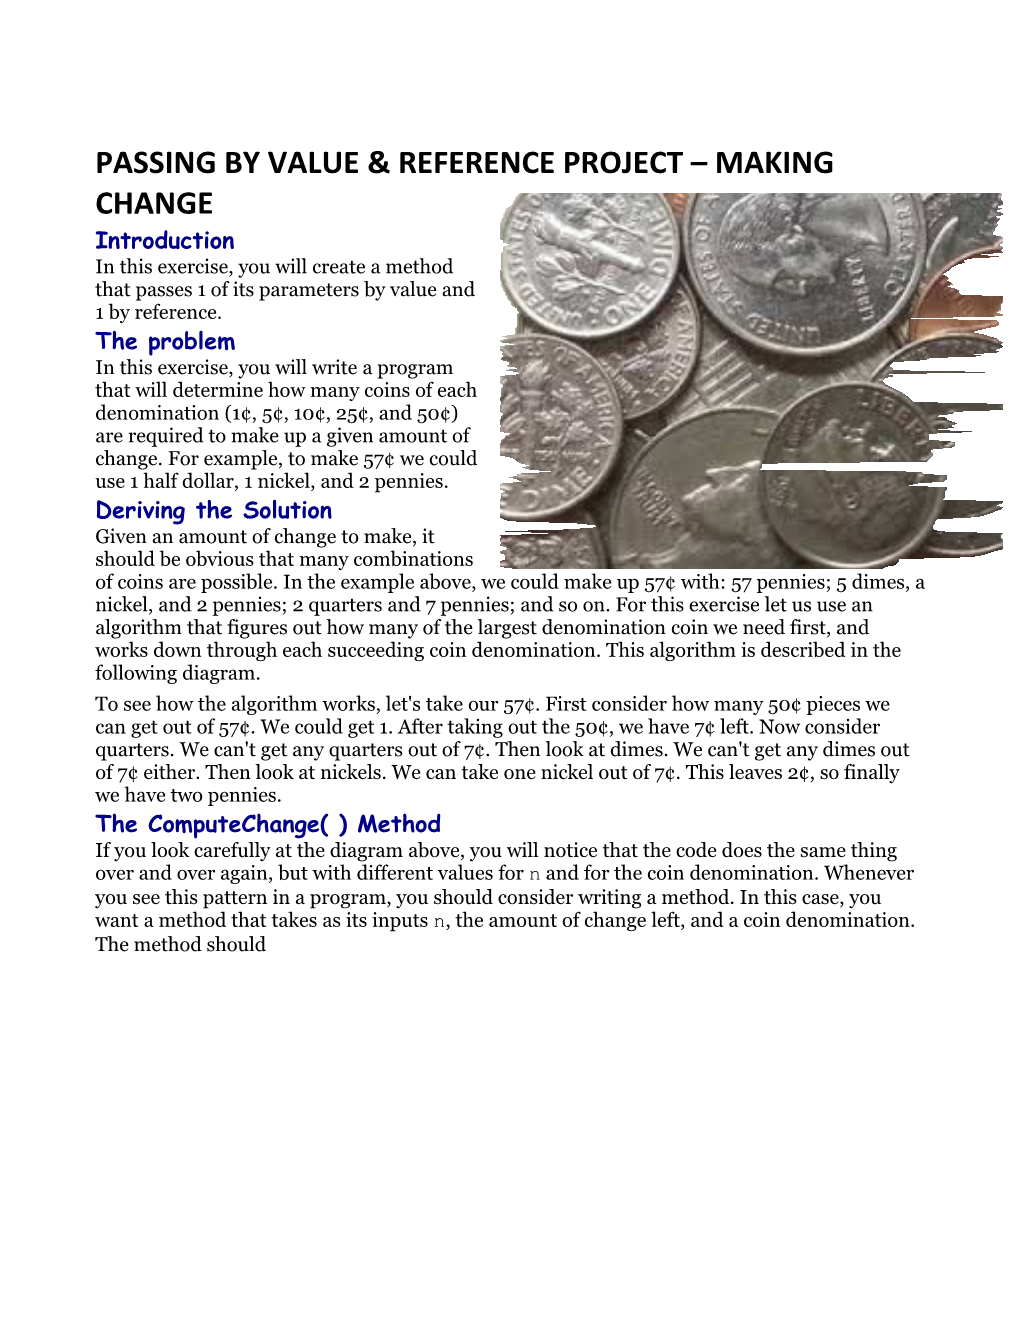 PASSING by VALUE & REFERENCE PROJECT MAKING CHANGE Introduction in This Exercise, You